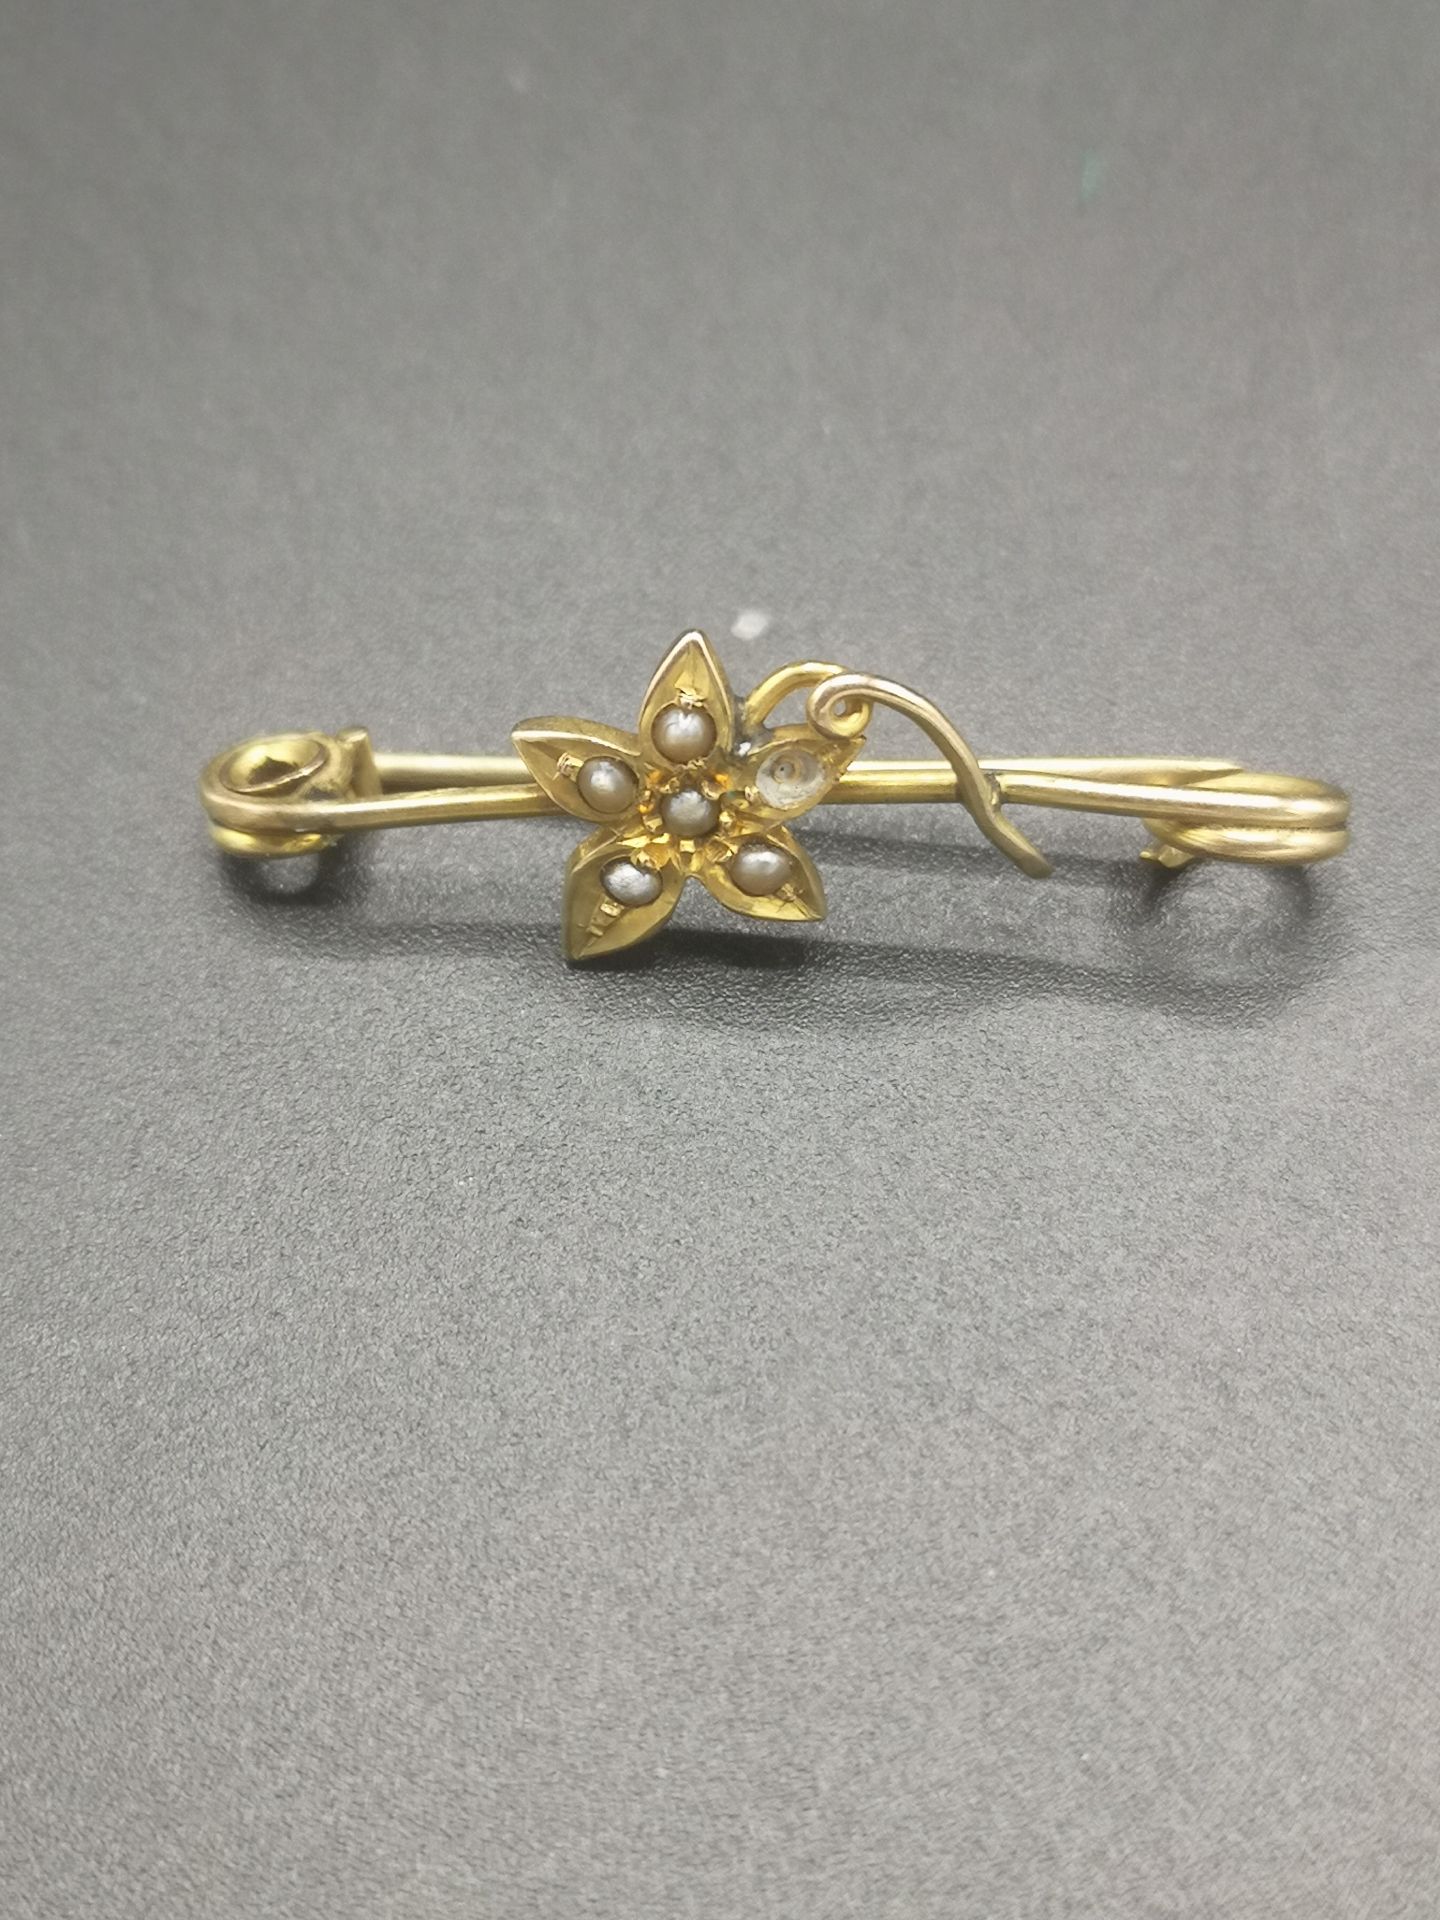 Collection of 9ct gold brooches and tie pins - Image 3 of 3